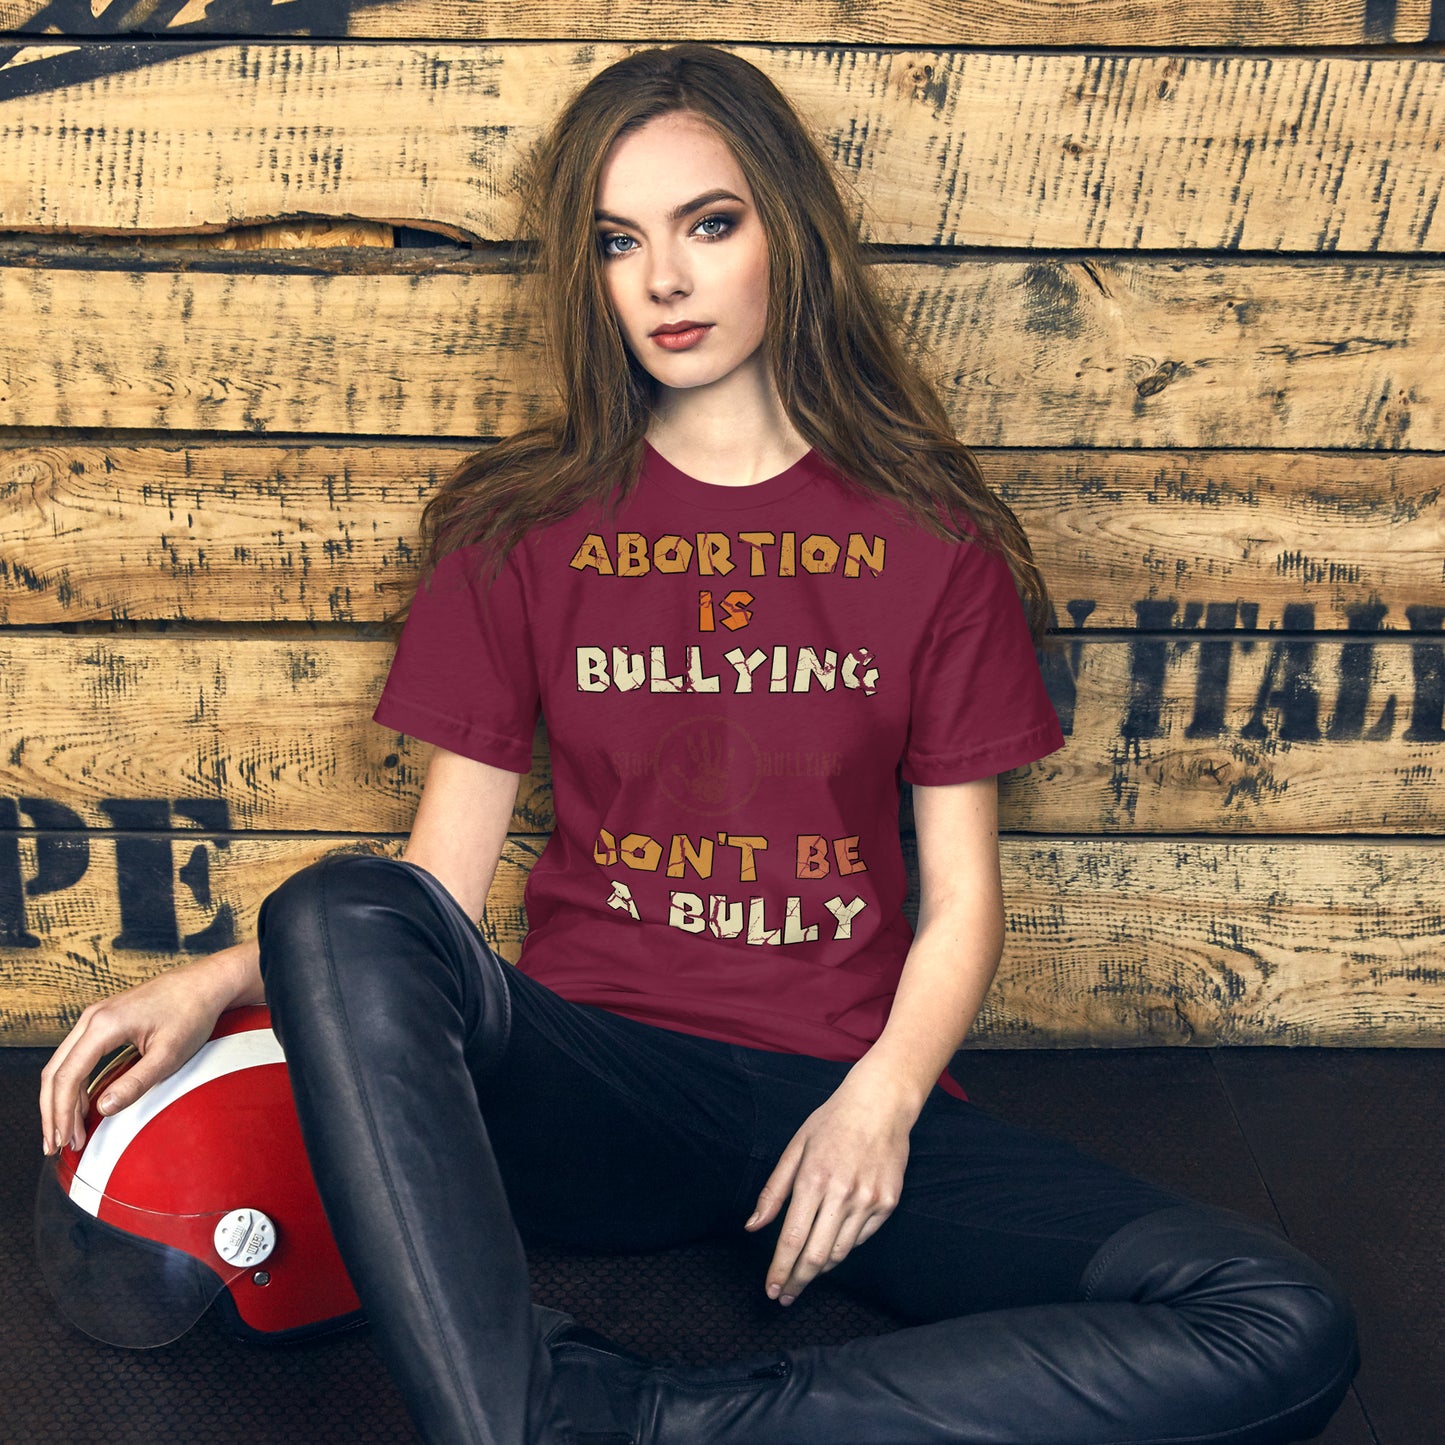 A001 T-shirt - Bella + Canvas 3001 Unisex T-shirt Featuring Stop-Hand Graphic with text “Abortion is Bullying. Don’t be a Bully.”